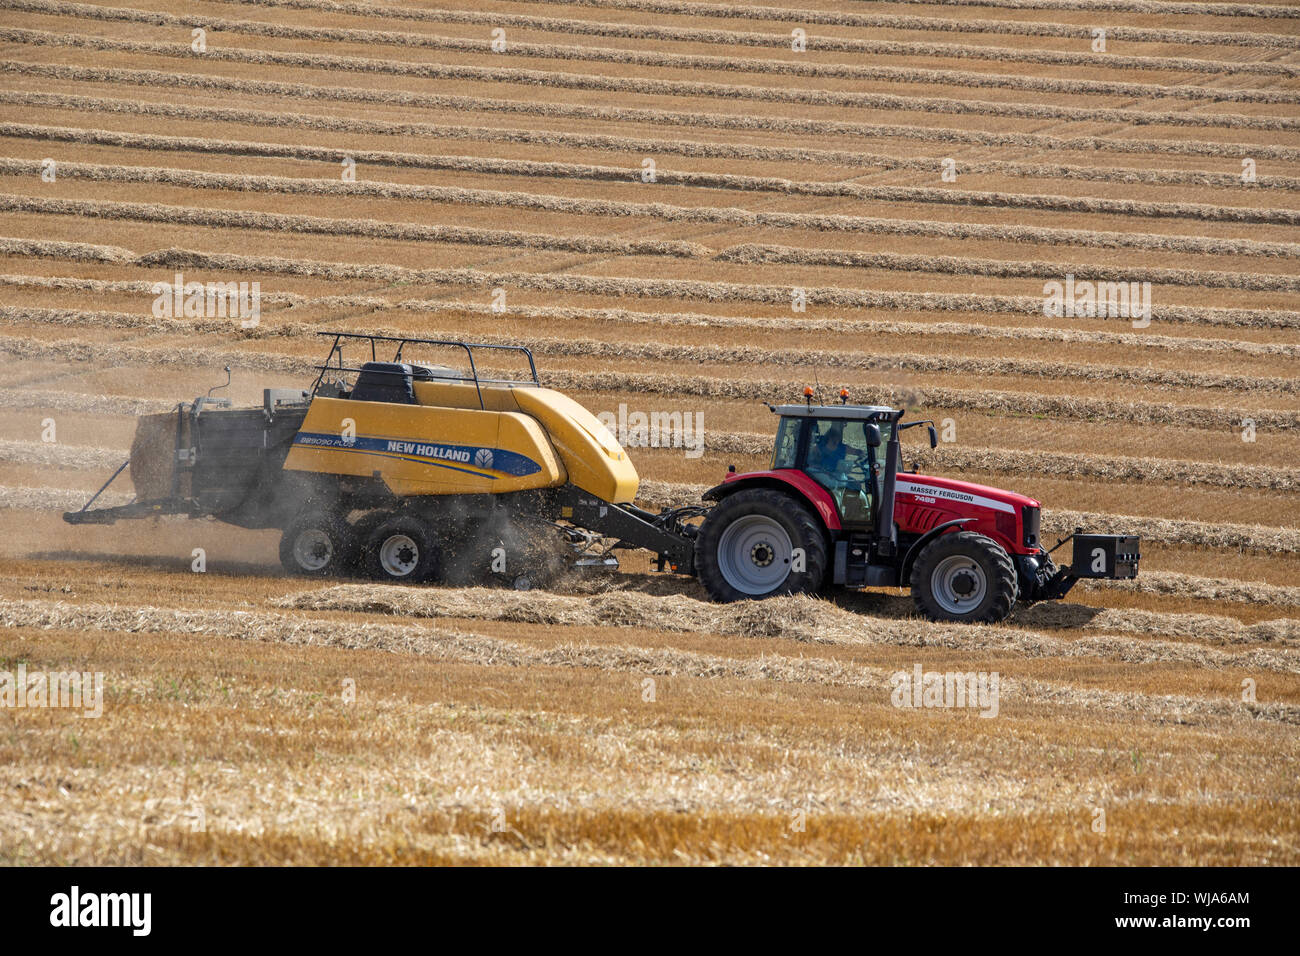 Hay Baler - farm machinery used to compress a cut and raked crop (such as hay, cotton, flax straw, salt marsh hay, or silage) into compact bales that Stock Photo